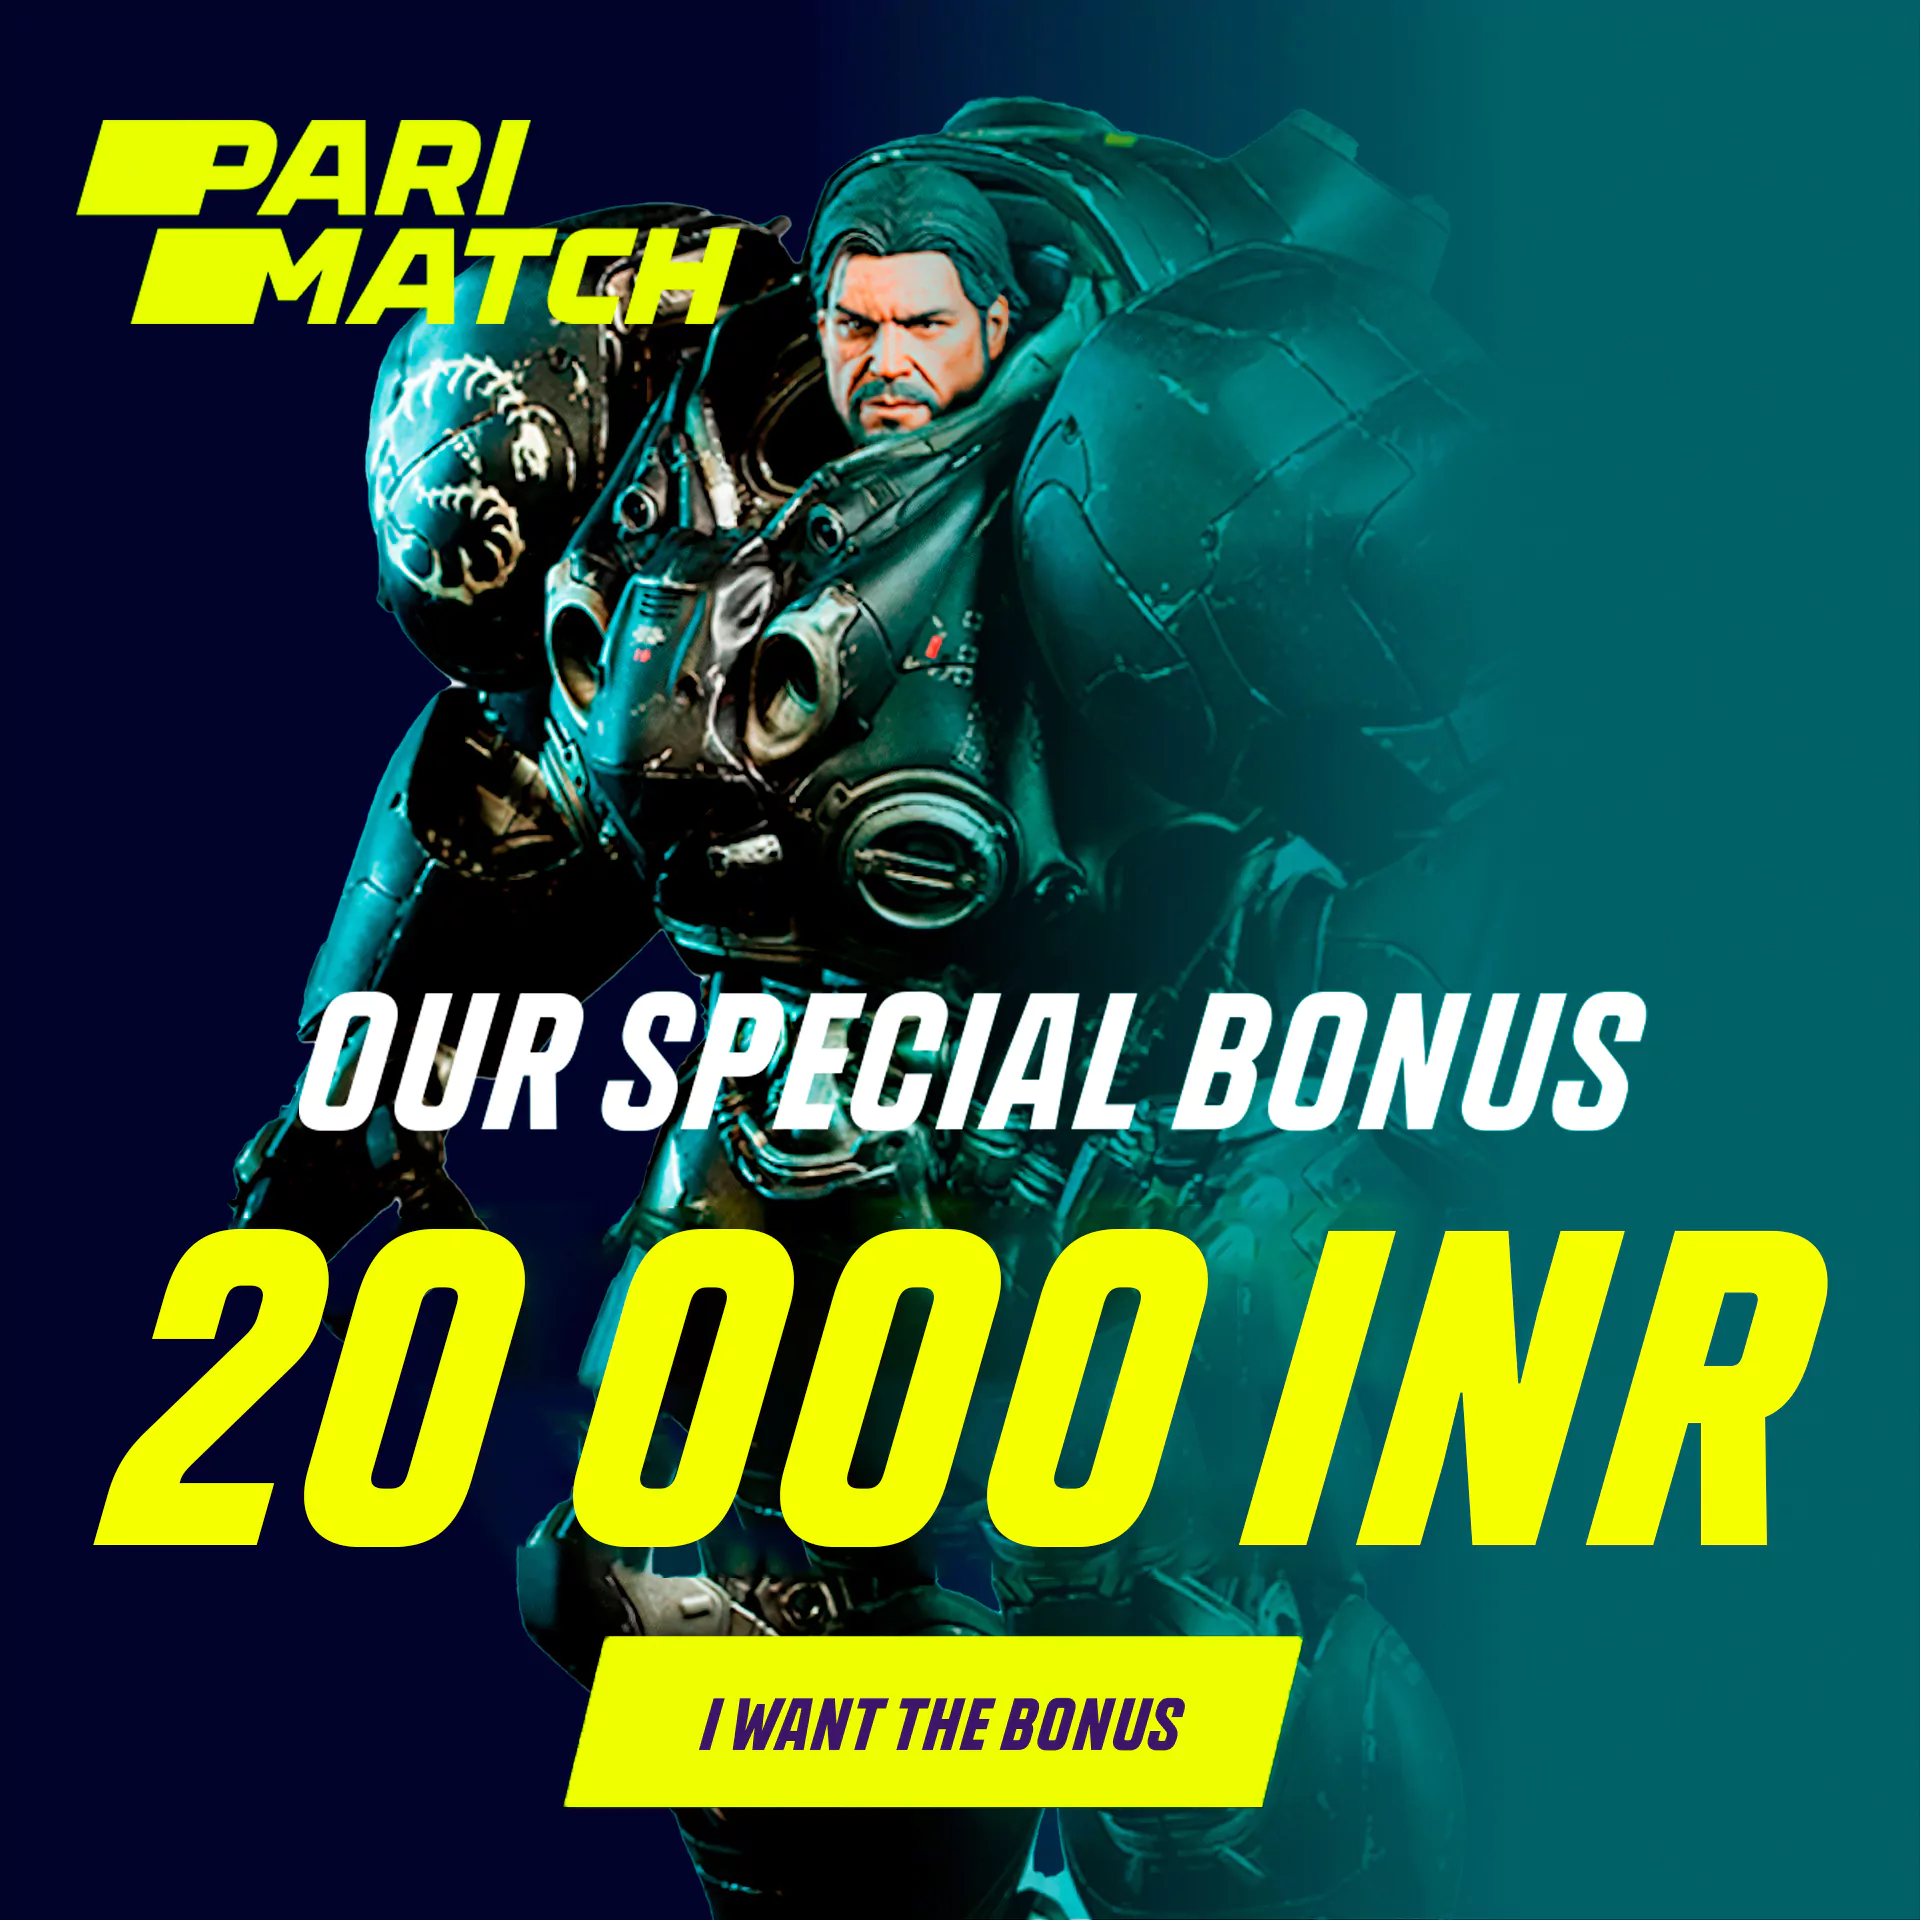 Start betting on StarCraft 2 and get a bonus of 20,000 rupees.